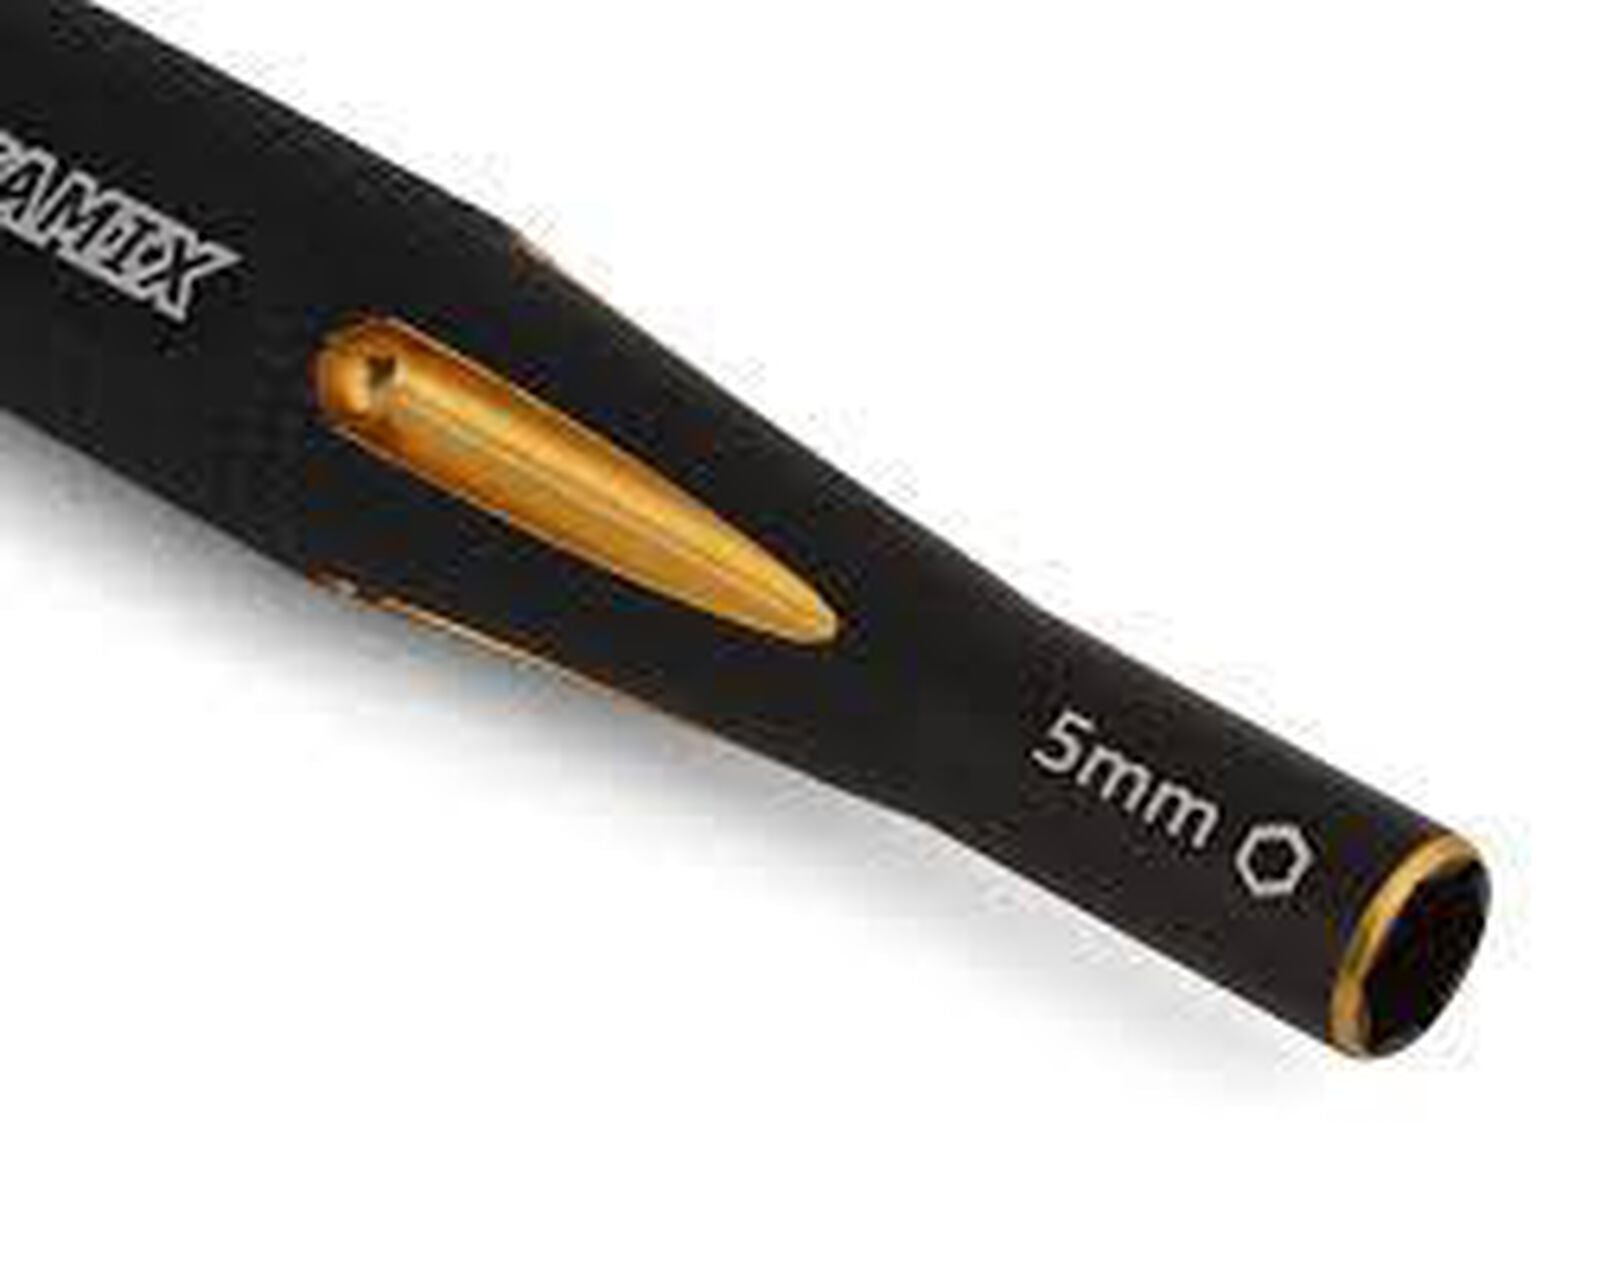 TRX-4M 2-In-1 Hex Wrench/Nut Driver (Gold) (1.5mm Hex/5mm Nut)